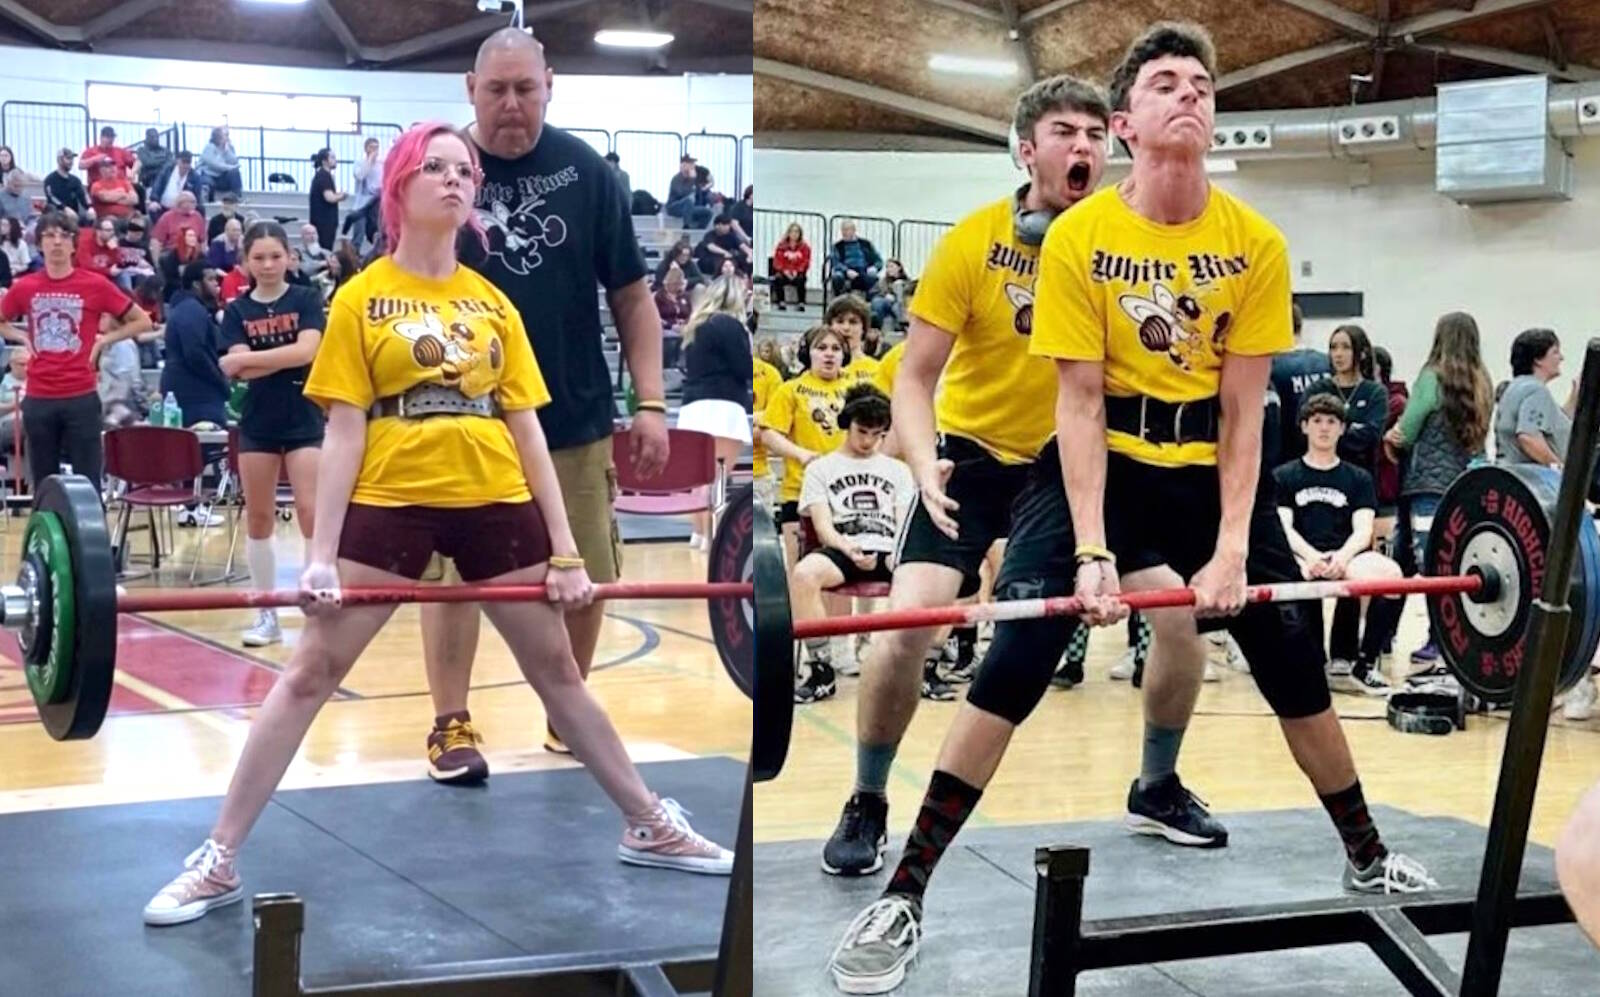 White River High was again a force at the state powerlifting championships. In these photos state champion Darbie Pearson is dead lifting 200 pounds with coach Juan Garibay doing the spotting, and Bennett Fraker dead lifting 325 pounds while getting encouragement from spotter Christian Chaussee. Submitted photos